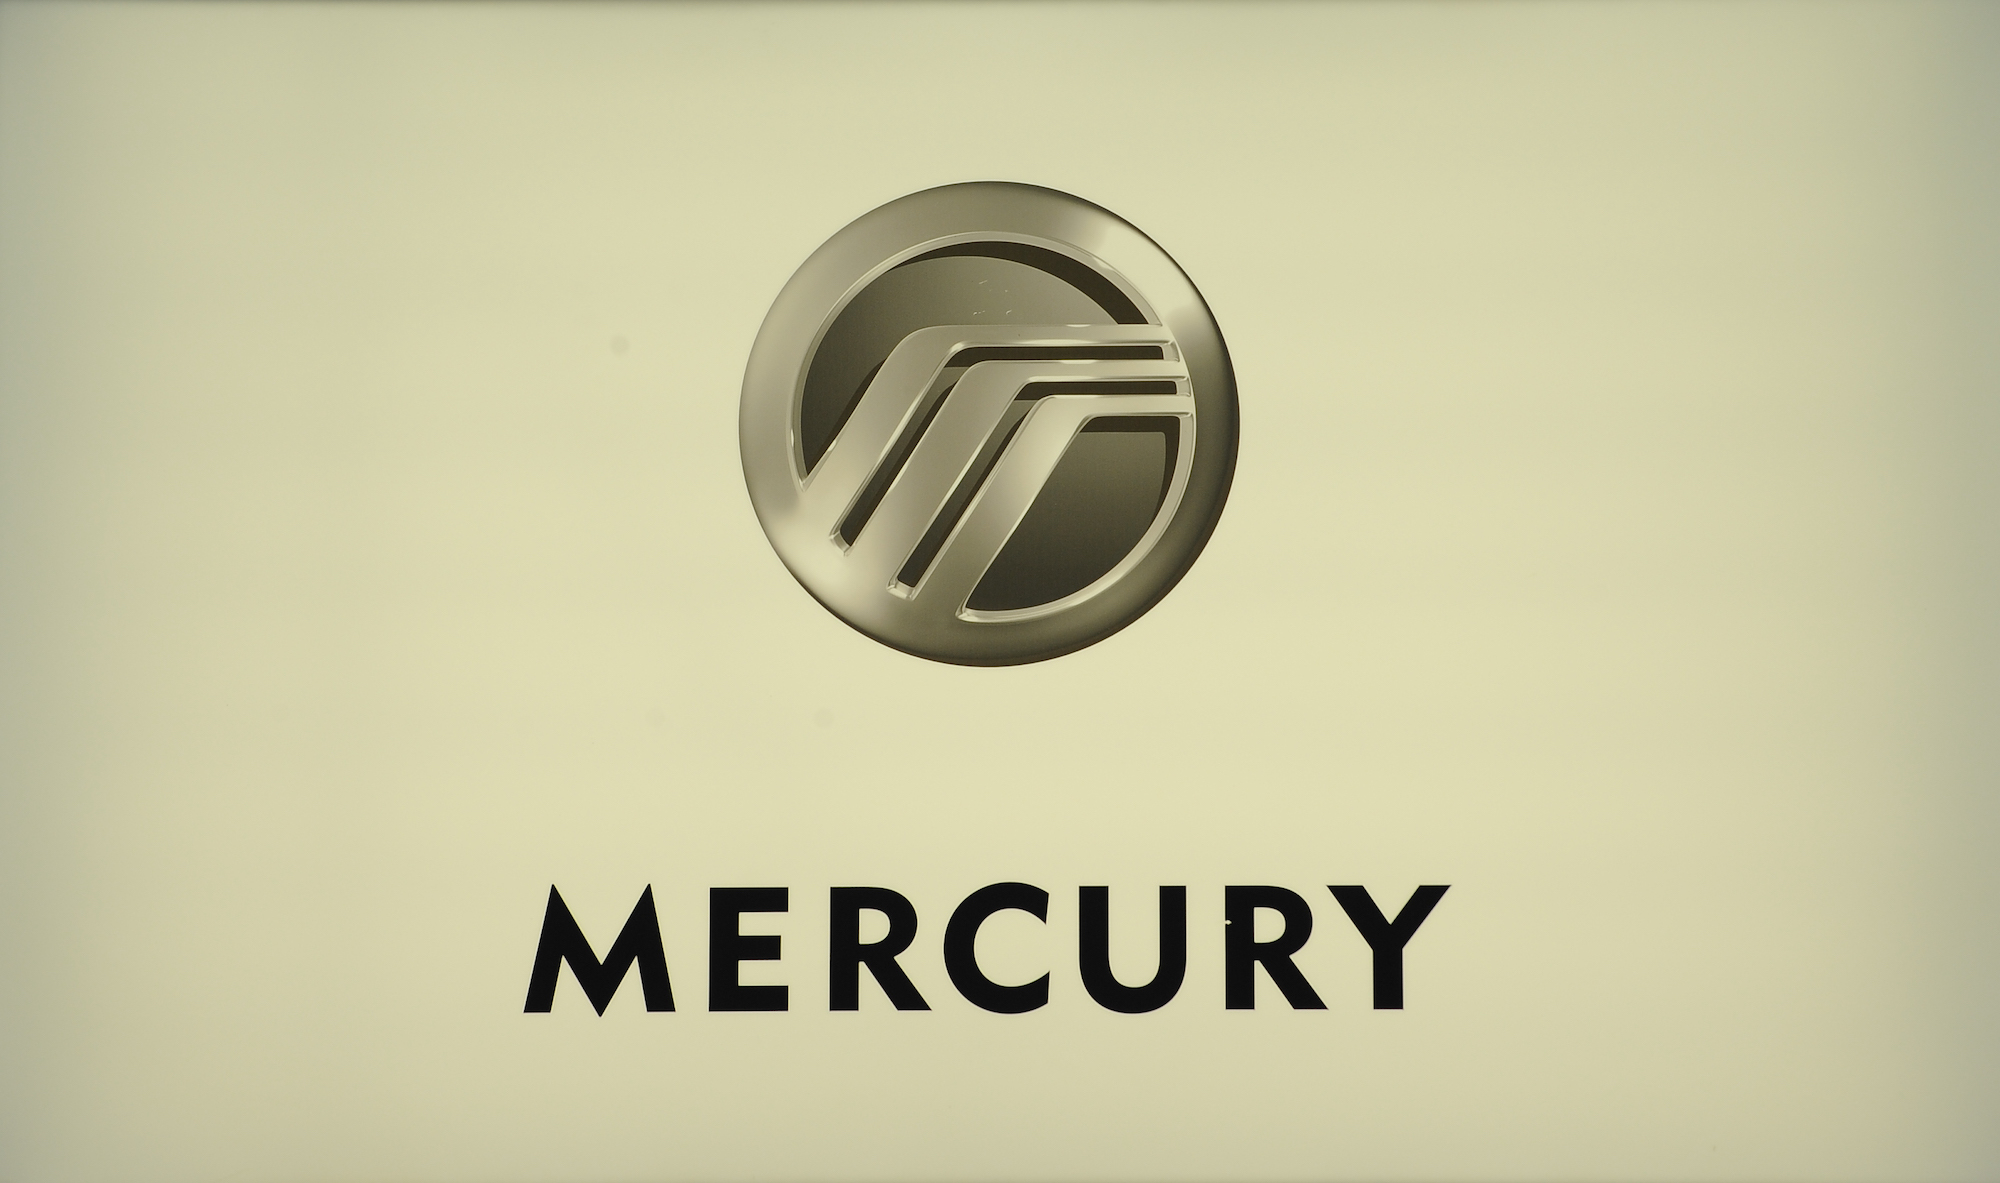 Logo of the Mercury division of Ford Motor Company at the North American International Auto Show on January 12, 2009, in Detroit, Michigan.